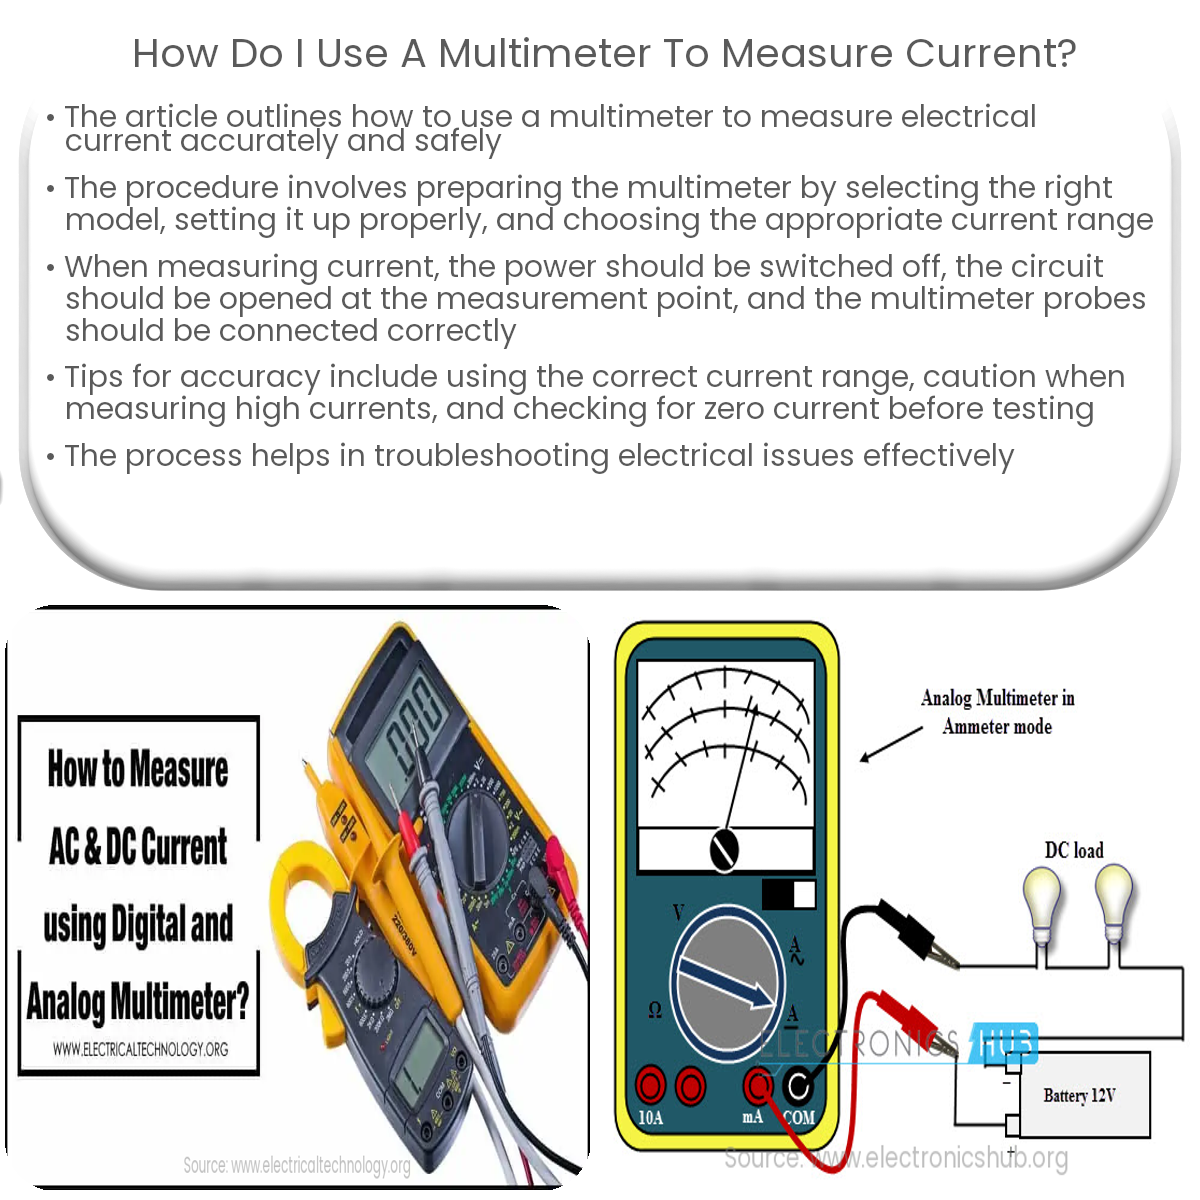 How to Use a Multimeter